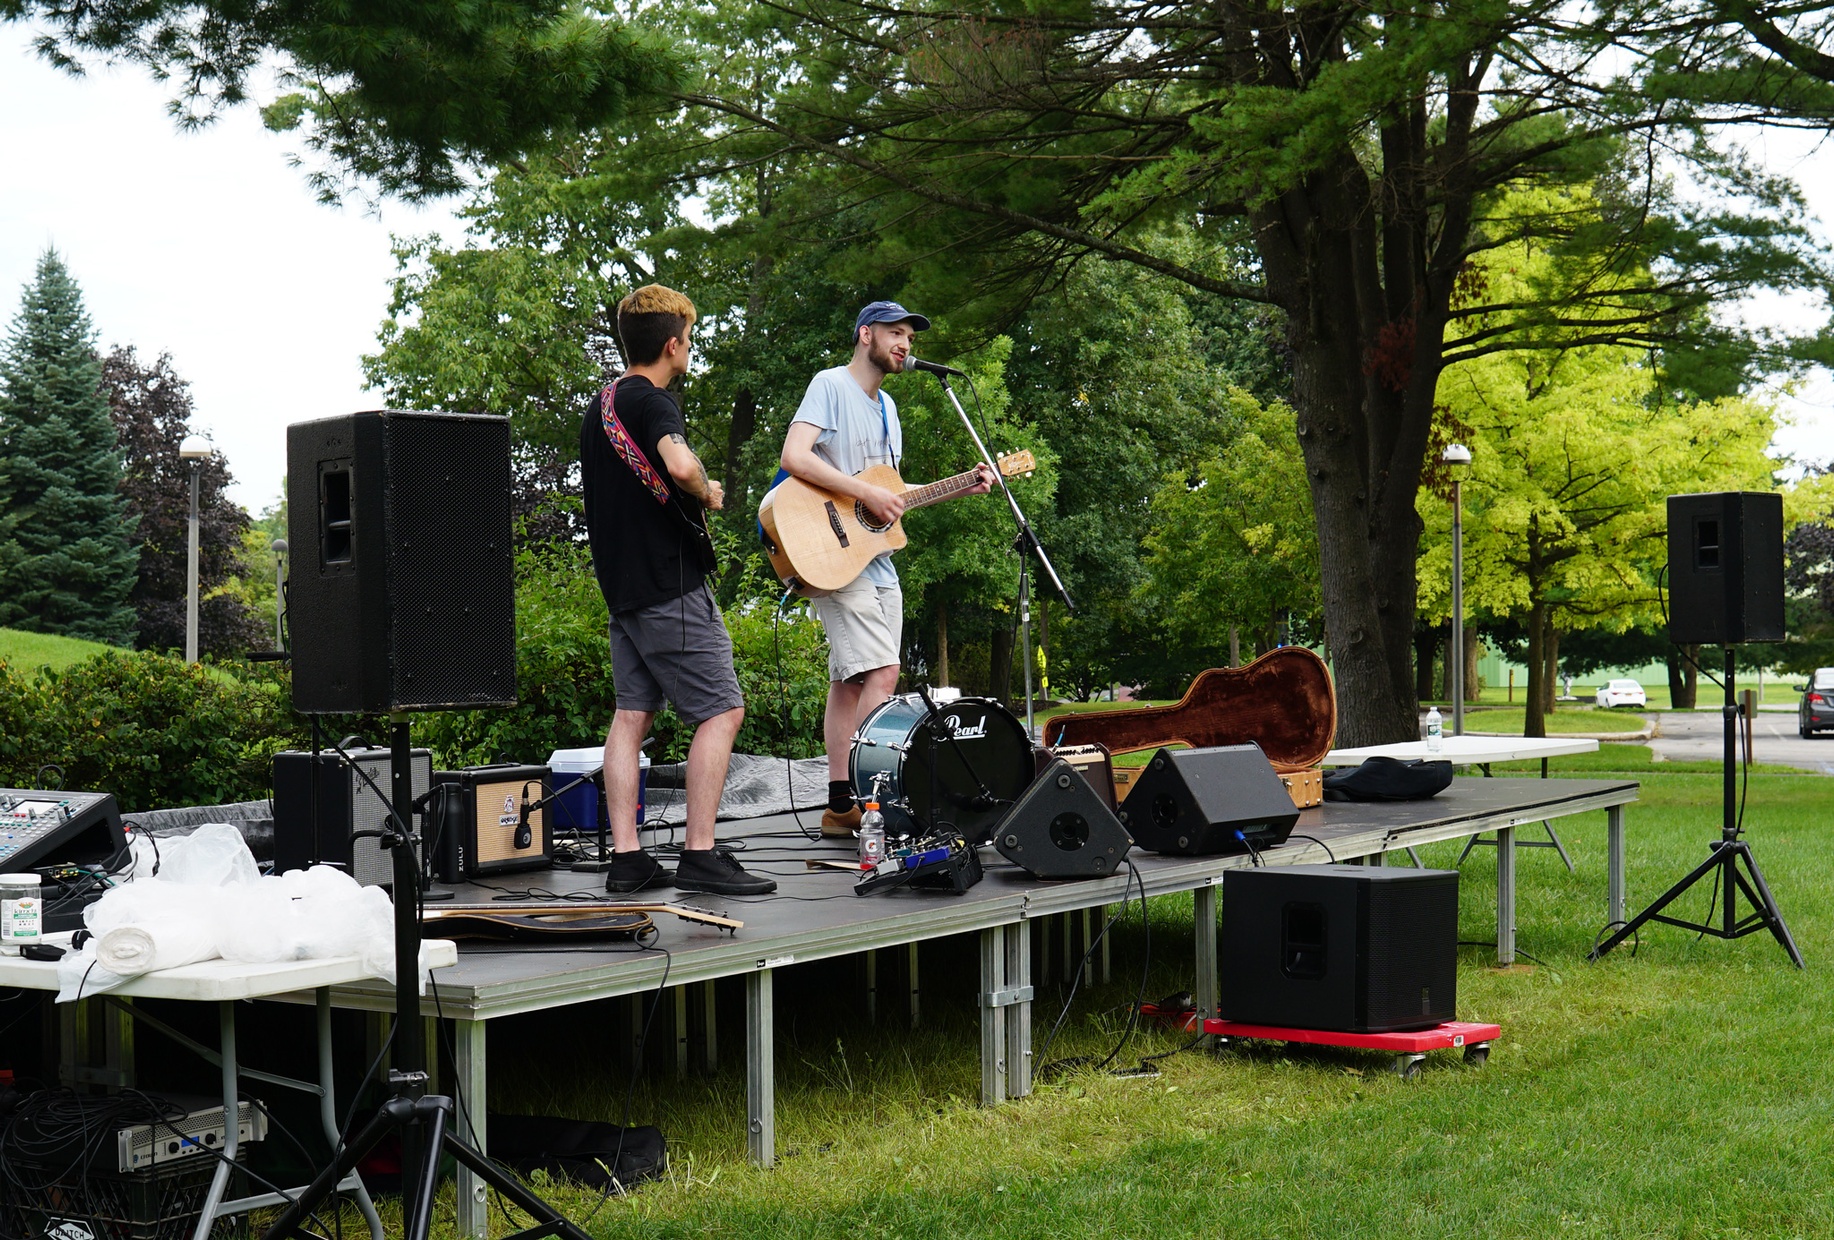 Two people stand atop an outdoor stage playing guitar, with lush green trees behind them. One sings into a microphone.